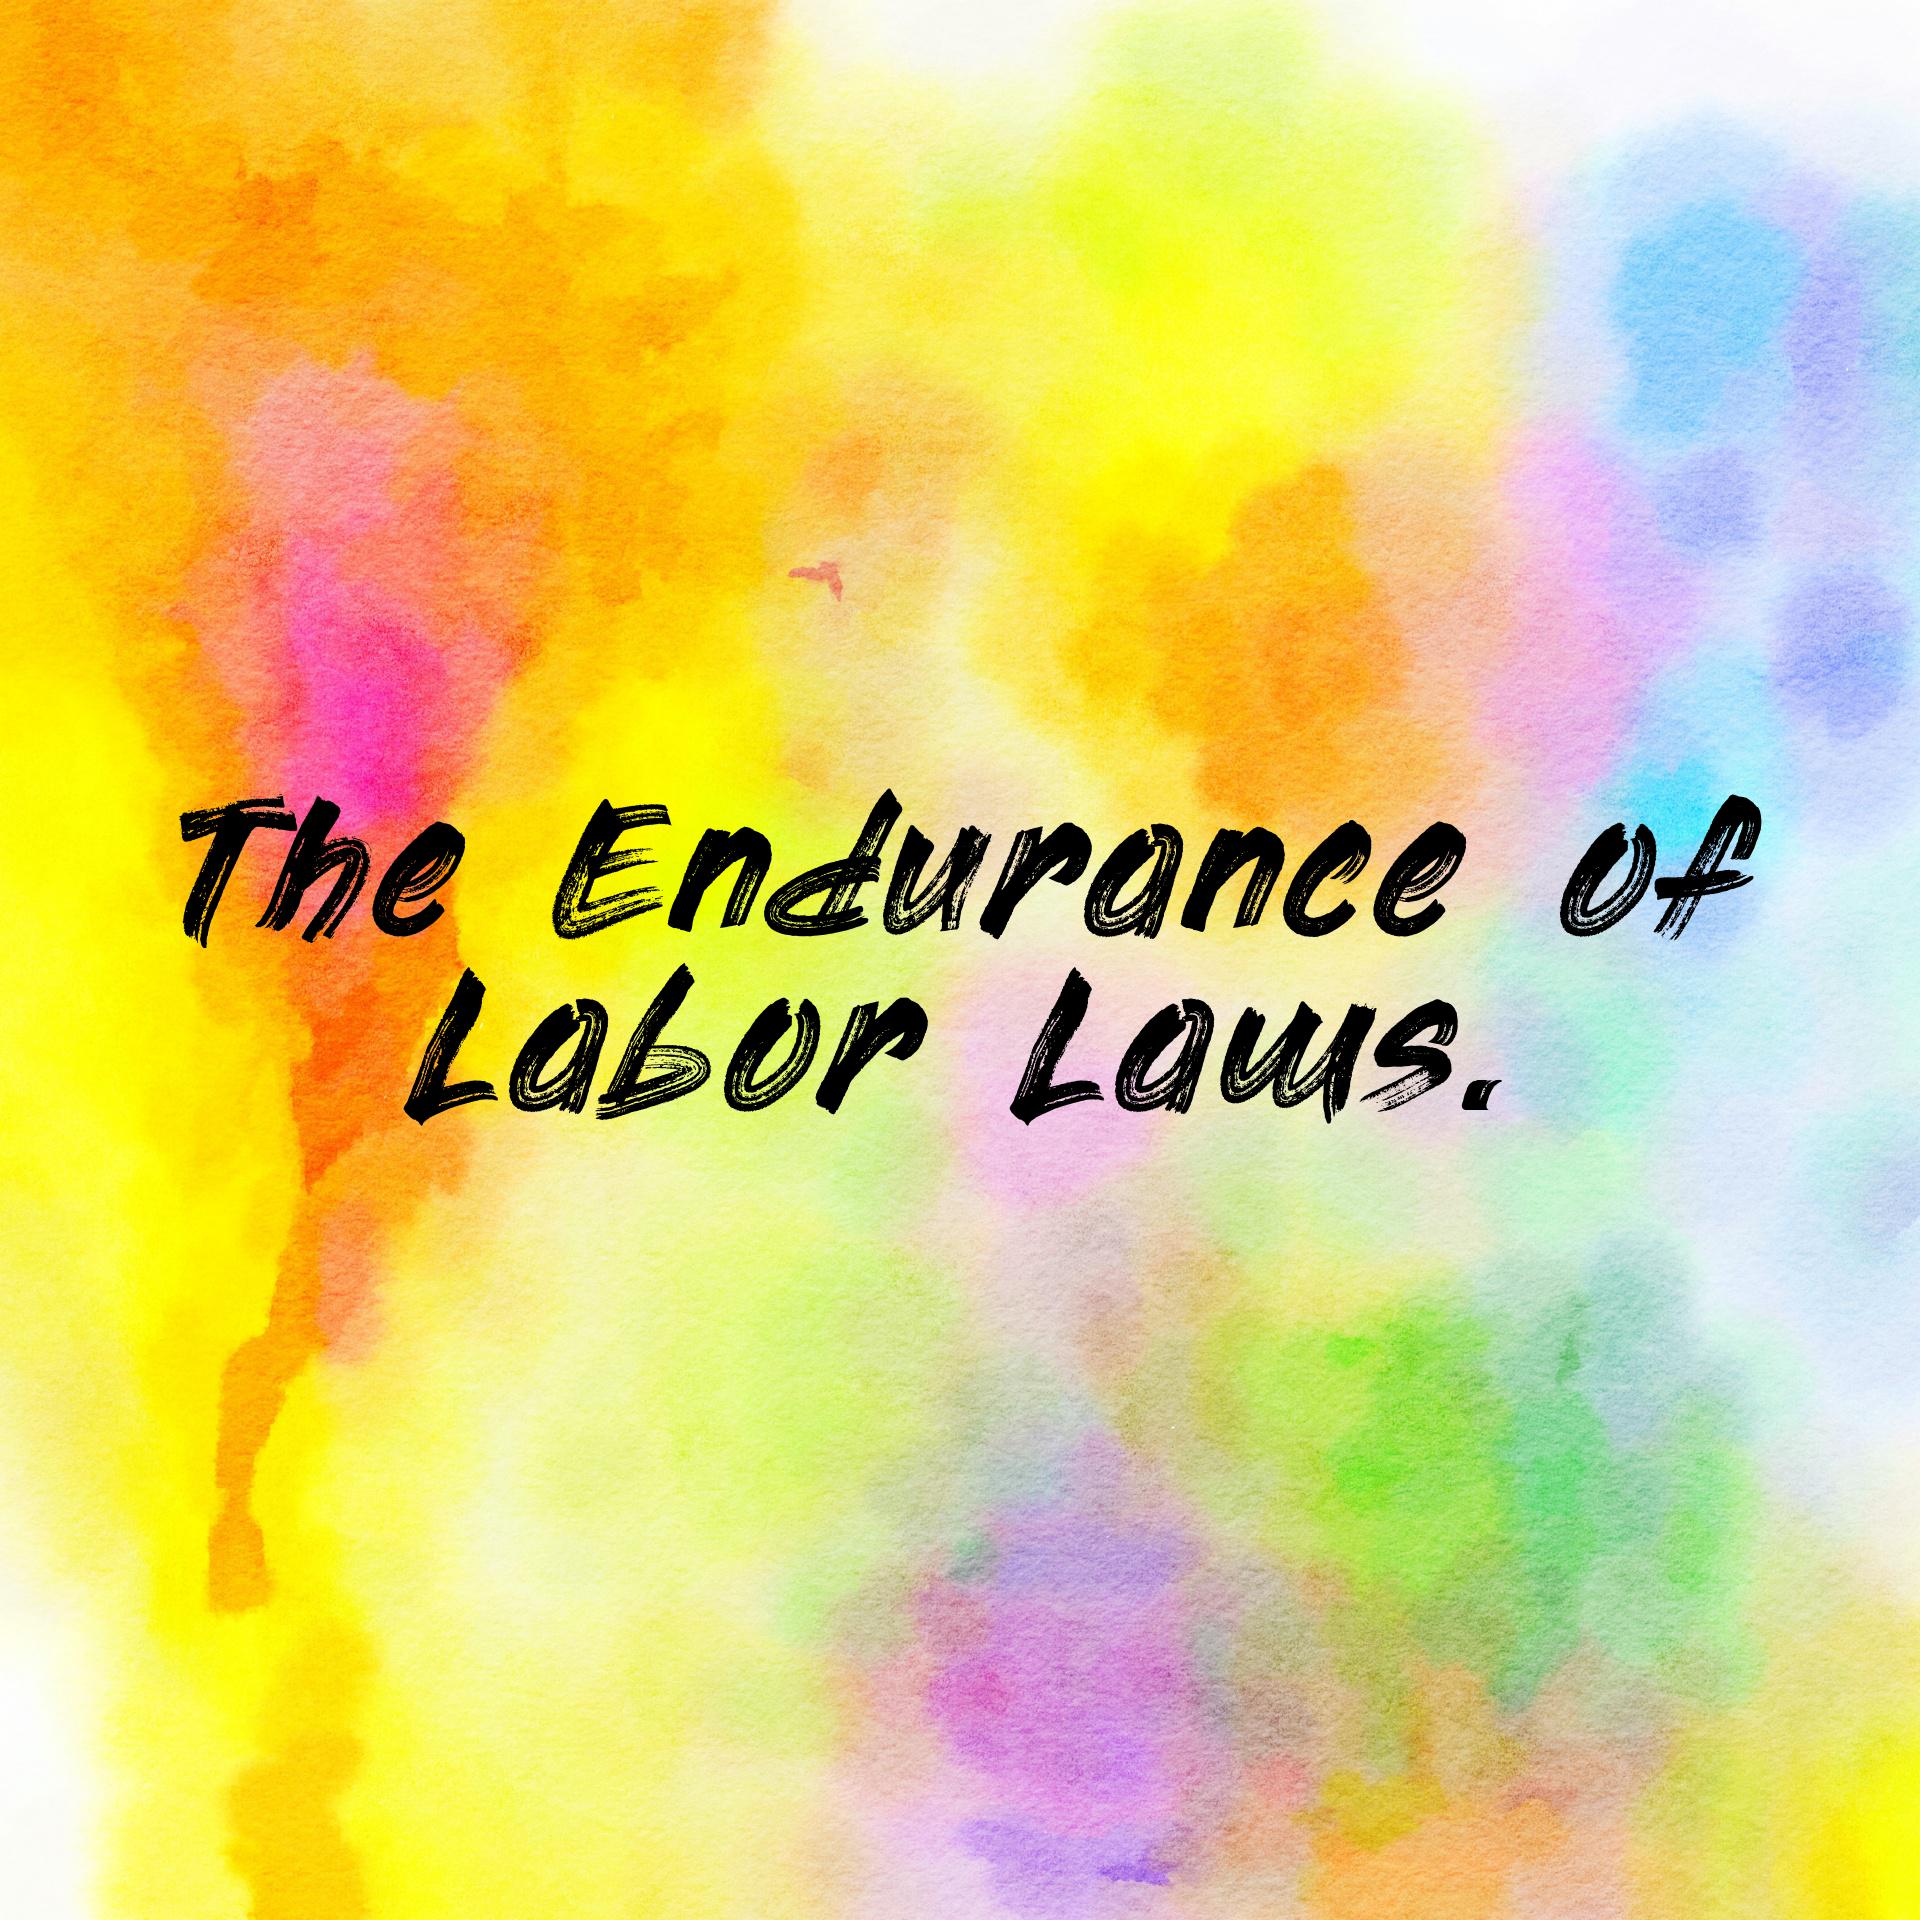 The Endurance of Labor Laws.